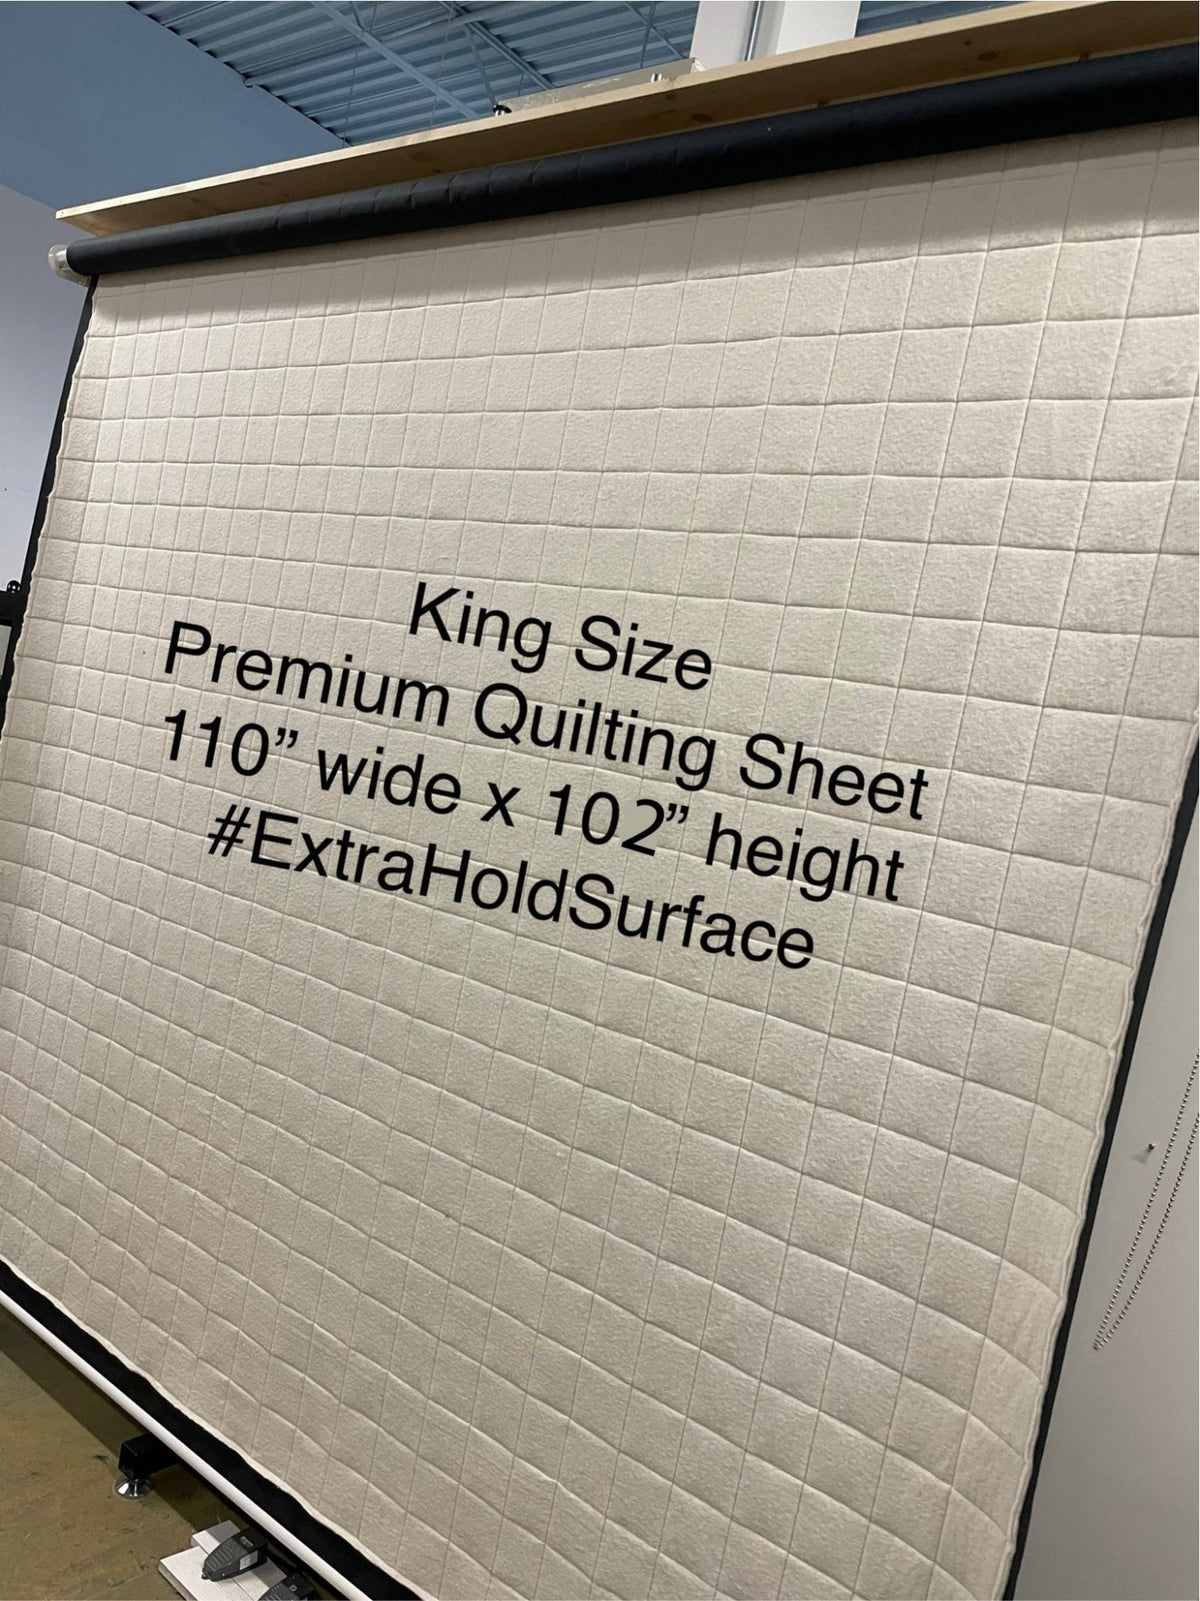 Premium Quilting Wall - Additional Quilting Sheets - King